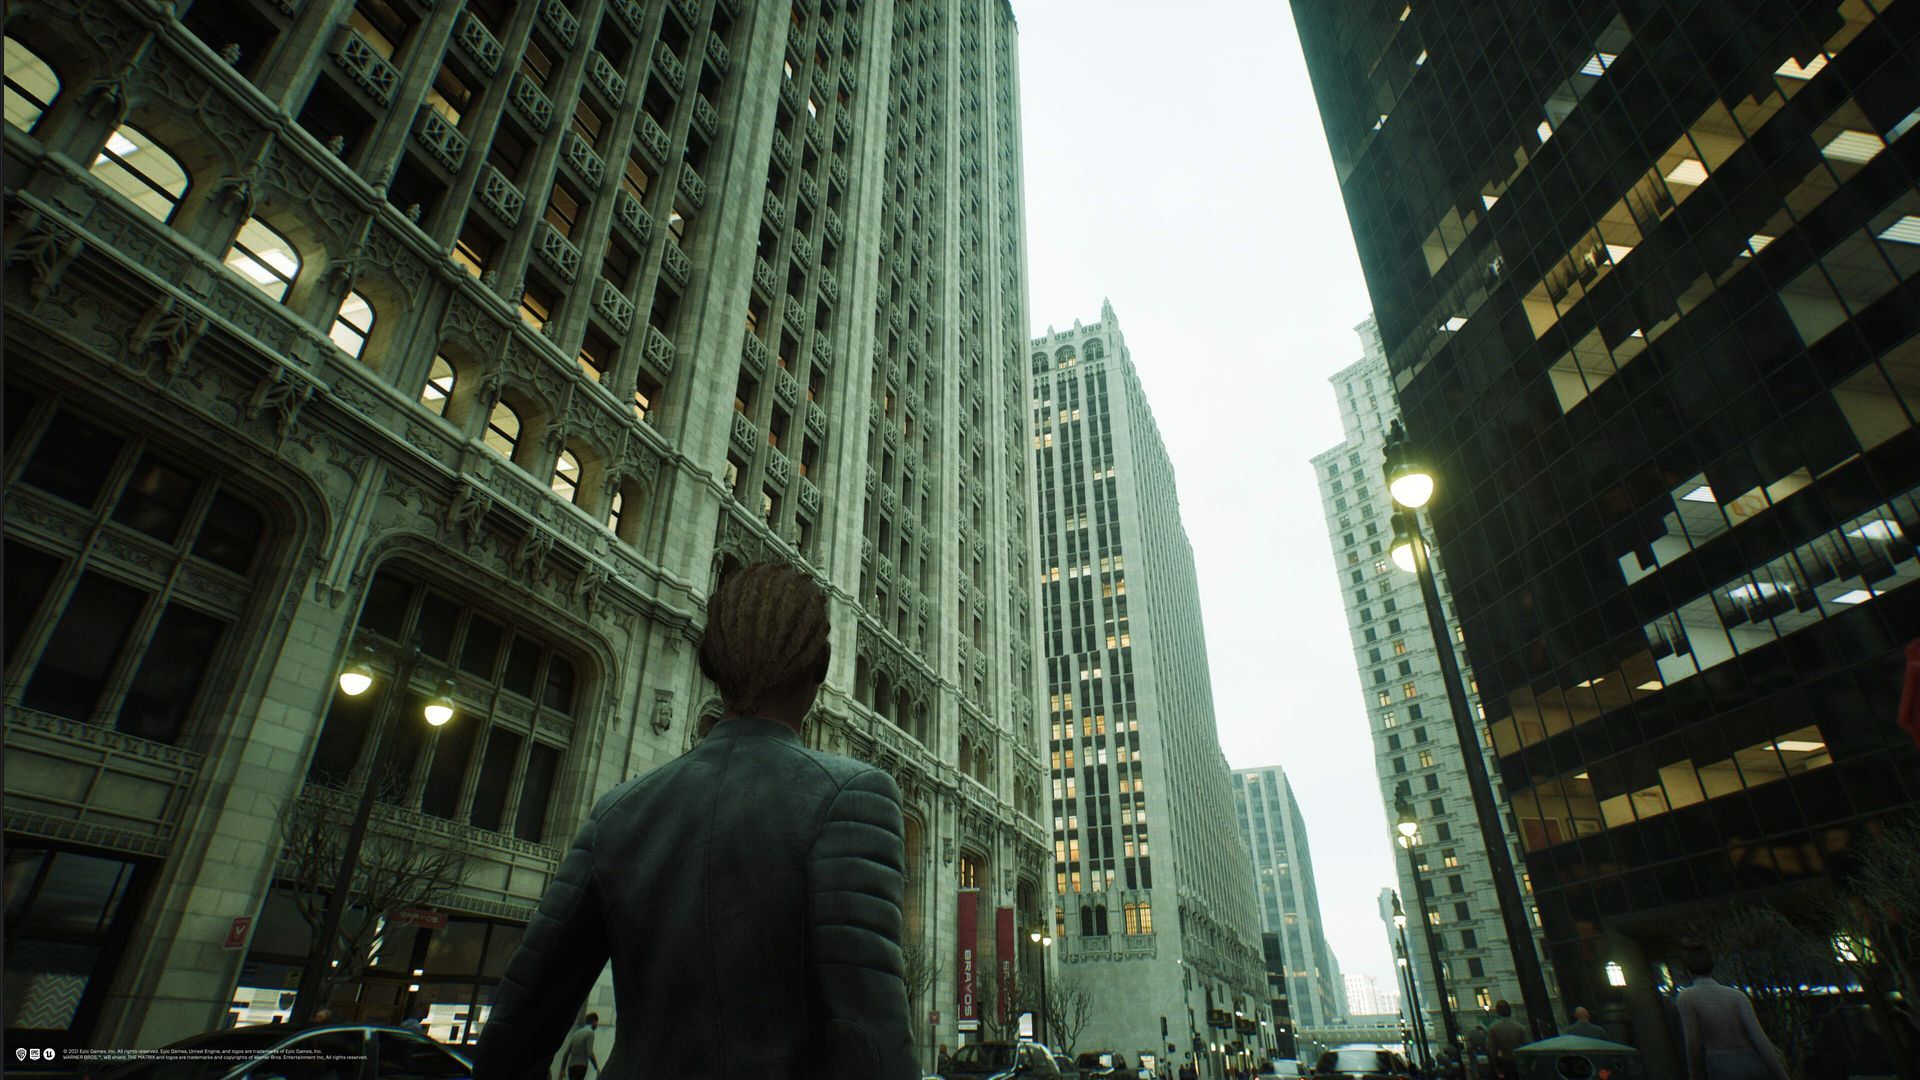 Screenshot of gameplay showing a person looking up at towering skyscrapers